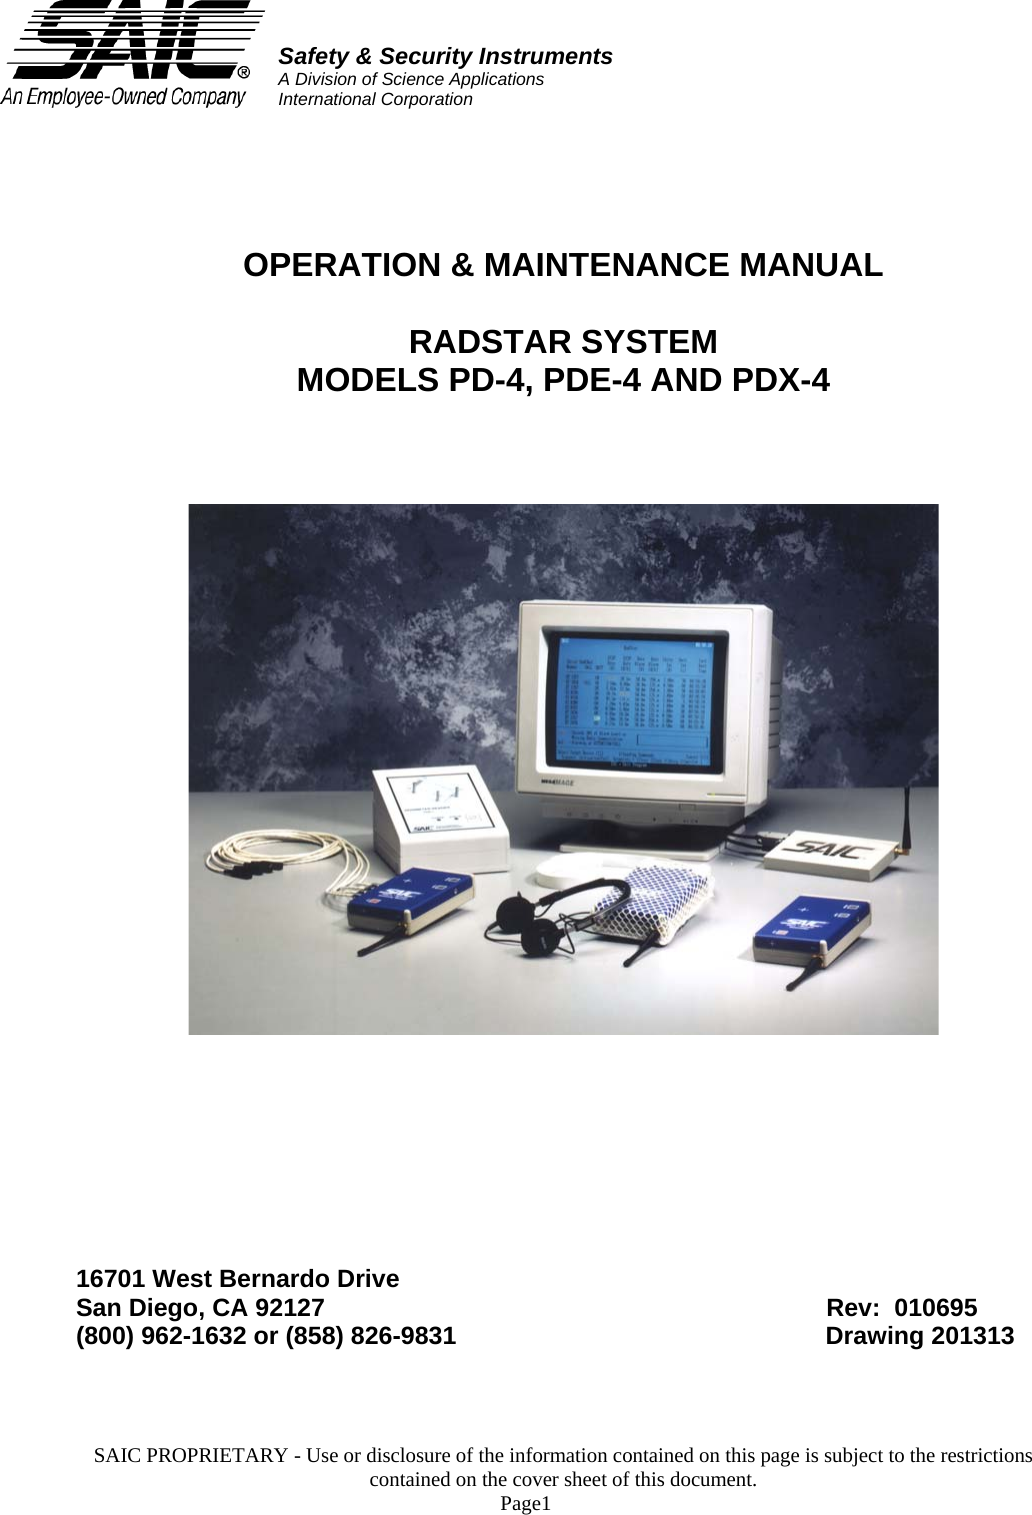 Safety &amp; Security InstrumentsA Division of Science ApplicationsInternational Corporation     OPERATION &amp; MAINTENANCE MANUAL  RADSTAR SYSTEM MODELS PD-4, PDE-4 AND PDX-4             16701 West Bernardo Drive San Diego, CA 92127       Rev:  010695 (800) 962-1632 or (858) 826-9831          Drawing 201313             SAIC PROPRIETARY - Use or disclosure of the information contained on this page is subject to the restrictions contained on the cover sheet of this document.    Page1 